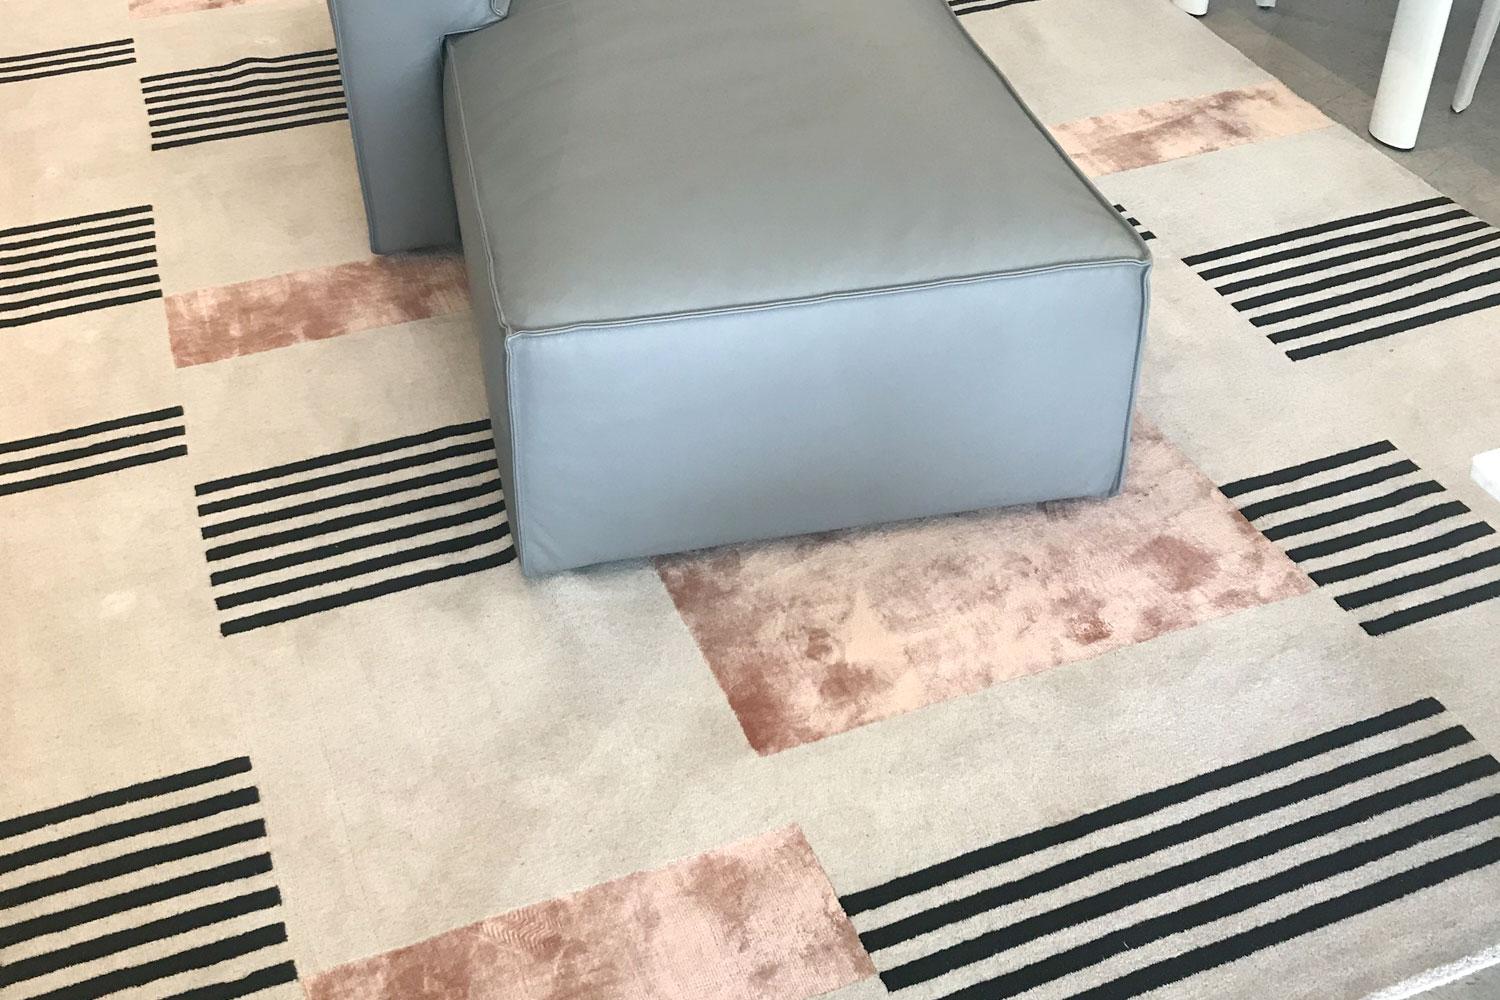 This CCTAPIS Metroquadro area rug hello Sonia! Is designed by Studiopepe and is Himalayan wool and bamboo silk and is woven by hand and is in the Flamingo color way. The mix of wool and silk give this graphic design versatility and